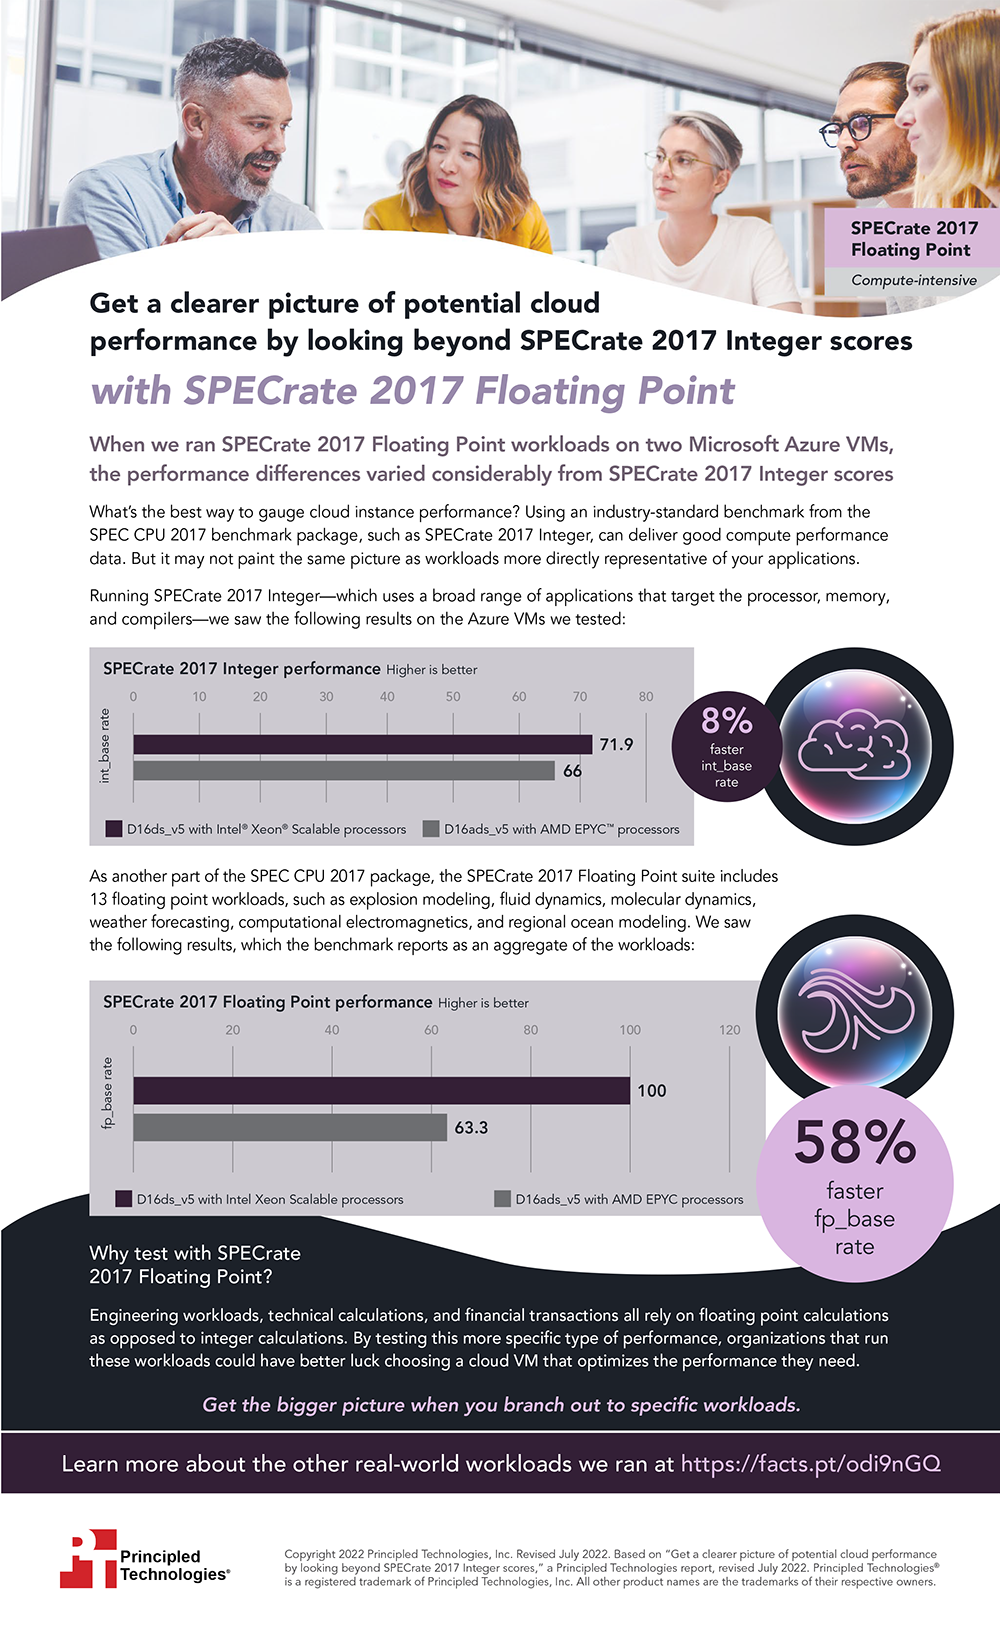  Get a clearer picture of potential cloud performance by looking beyond SPECrate 2017 Integer scores with SPECrate 2017 Floating Point - Infographic